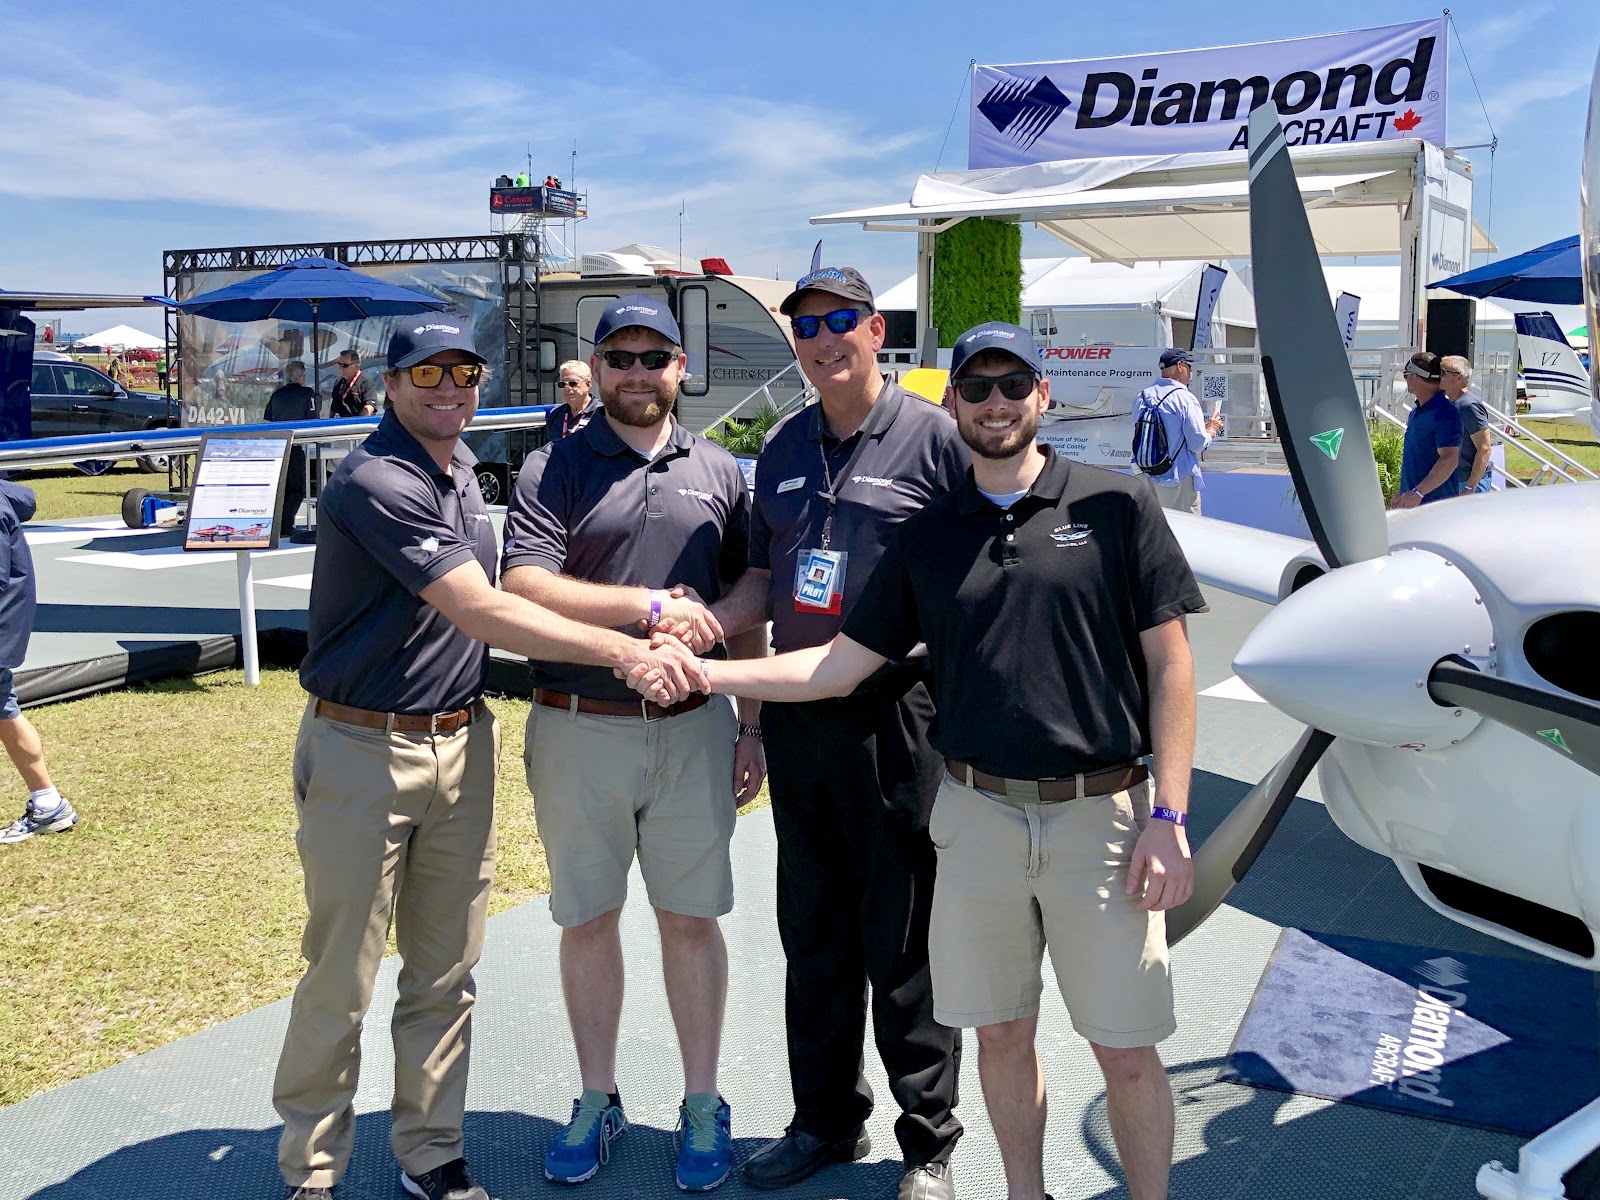 John Armstrong Shaking Hands with Diamond Aircraft